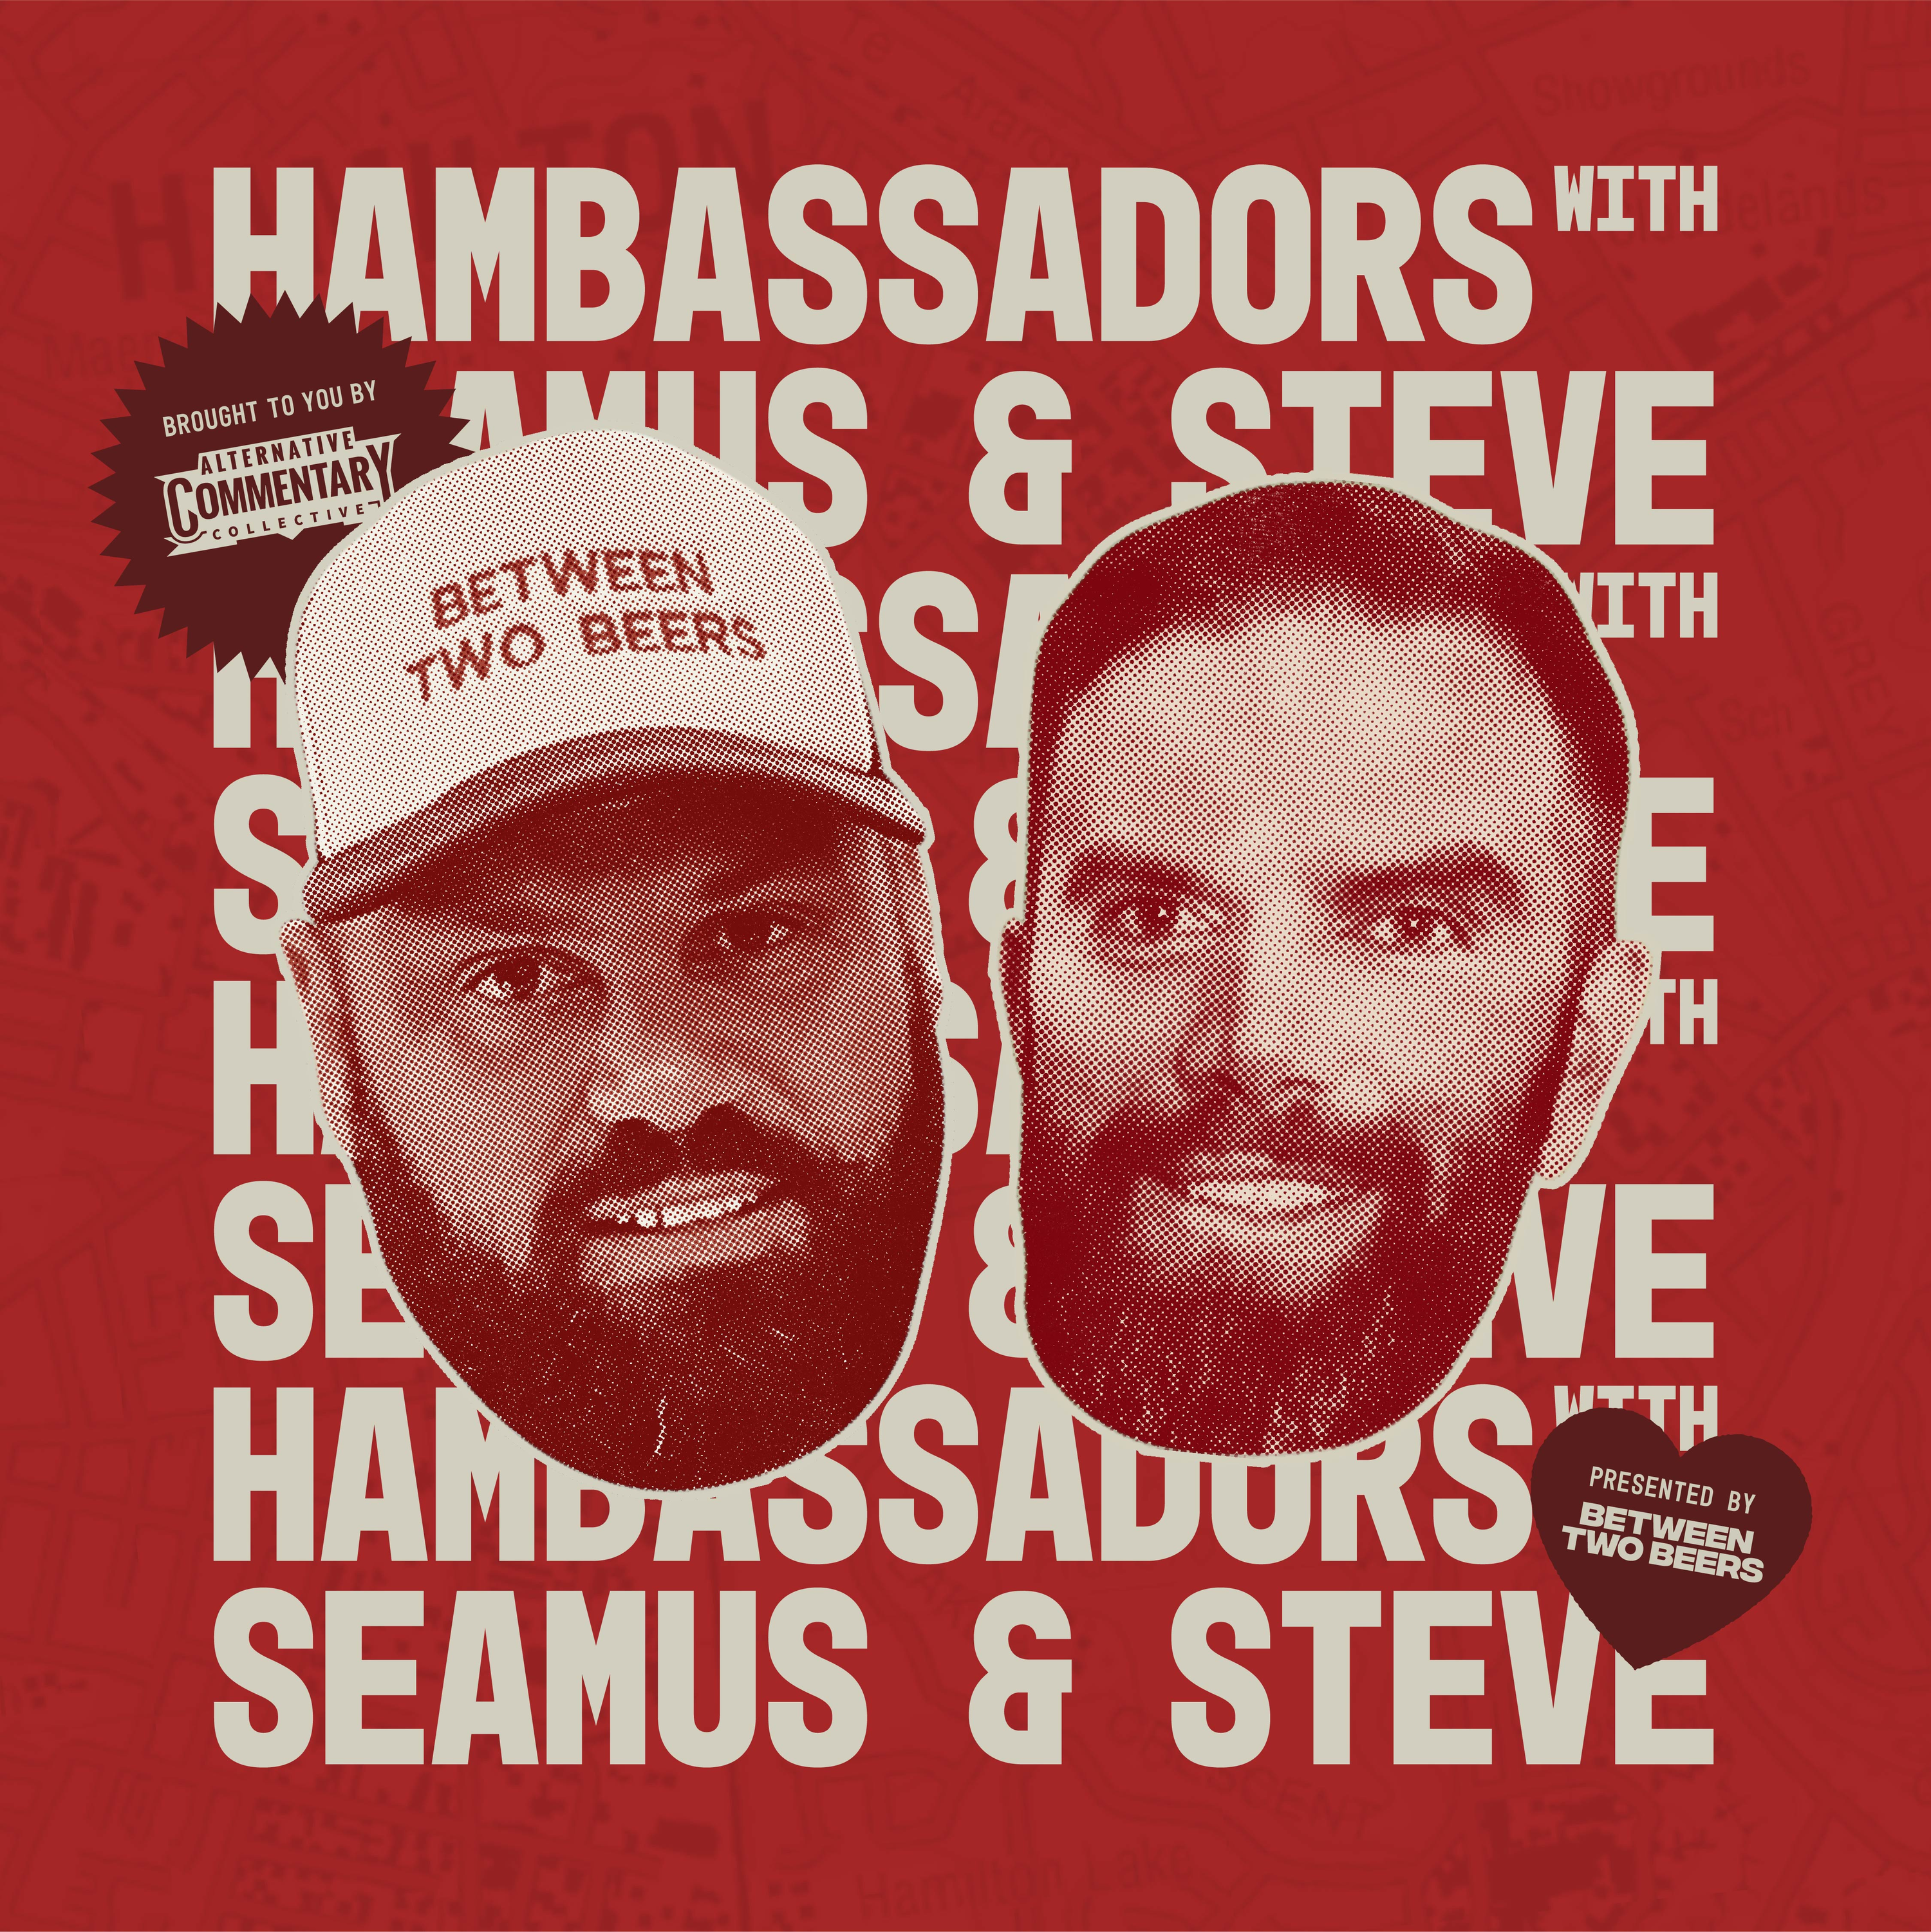 Hambassadors #14: Presenting at the 2024 Halbergs, Learn to Pod with Steve, Behind the Scenes with Tim Brown